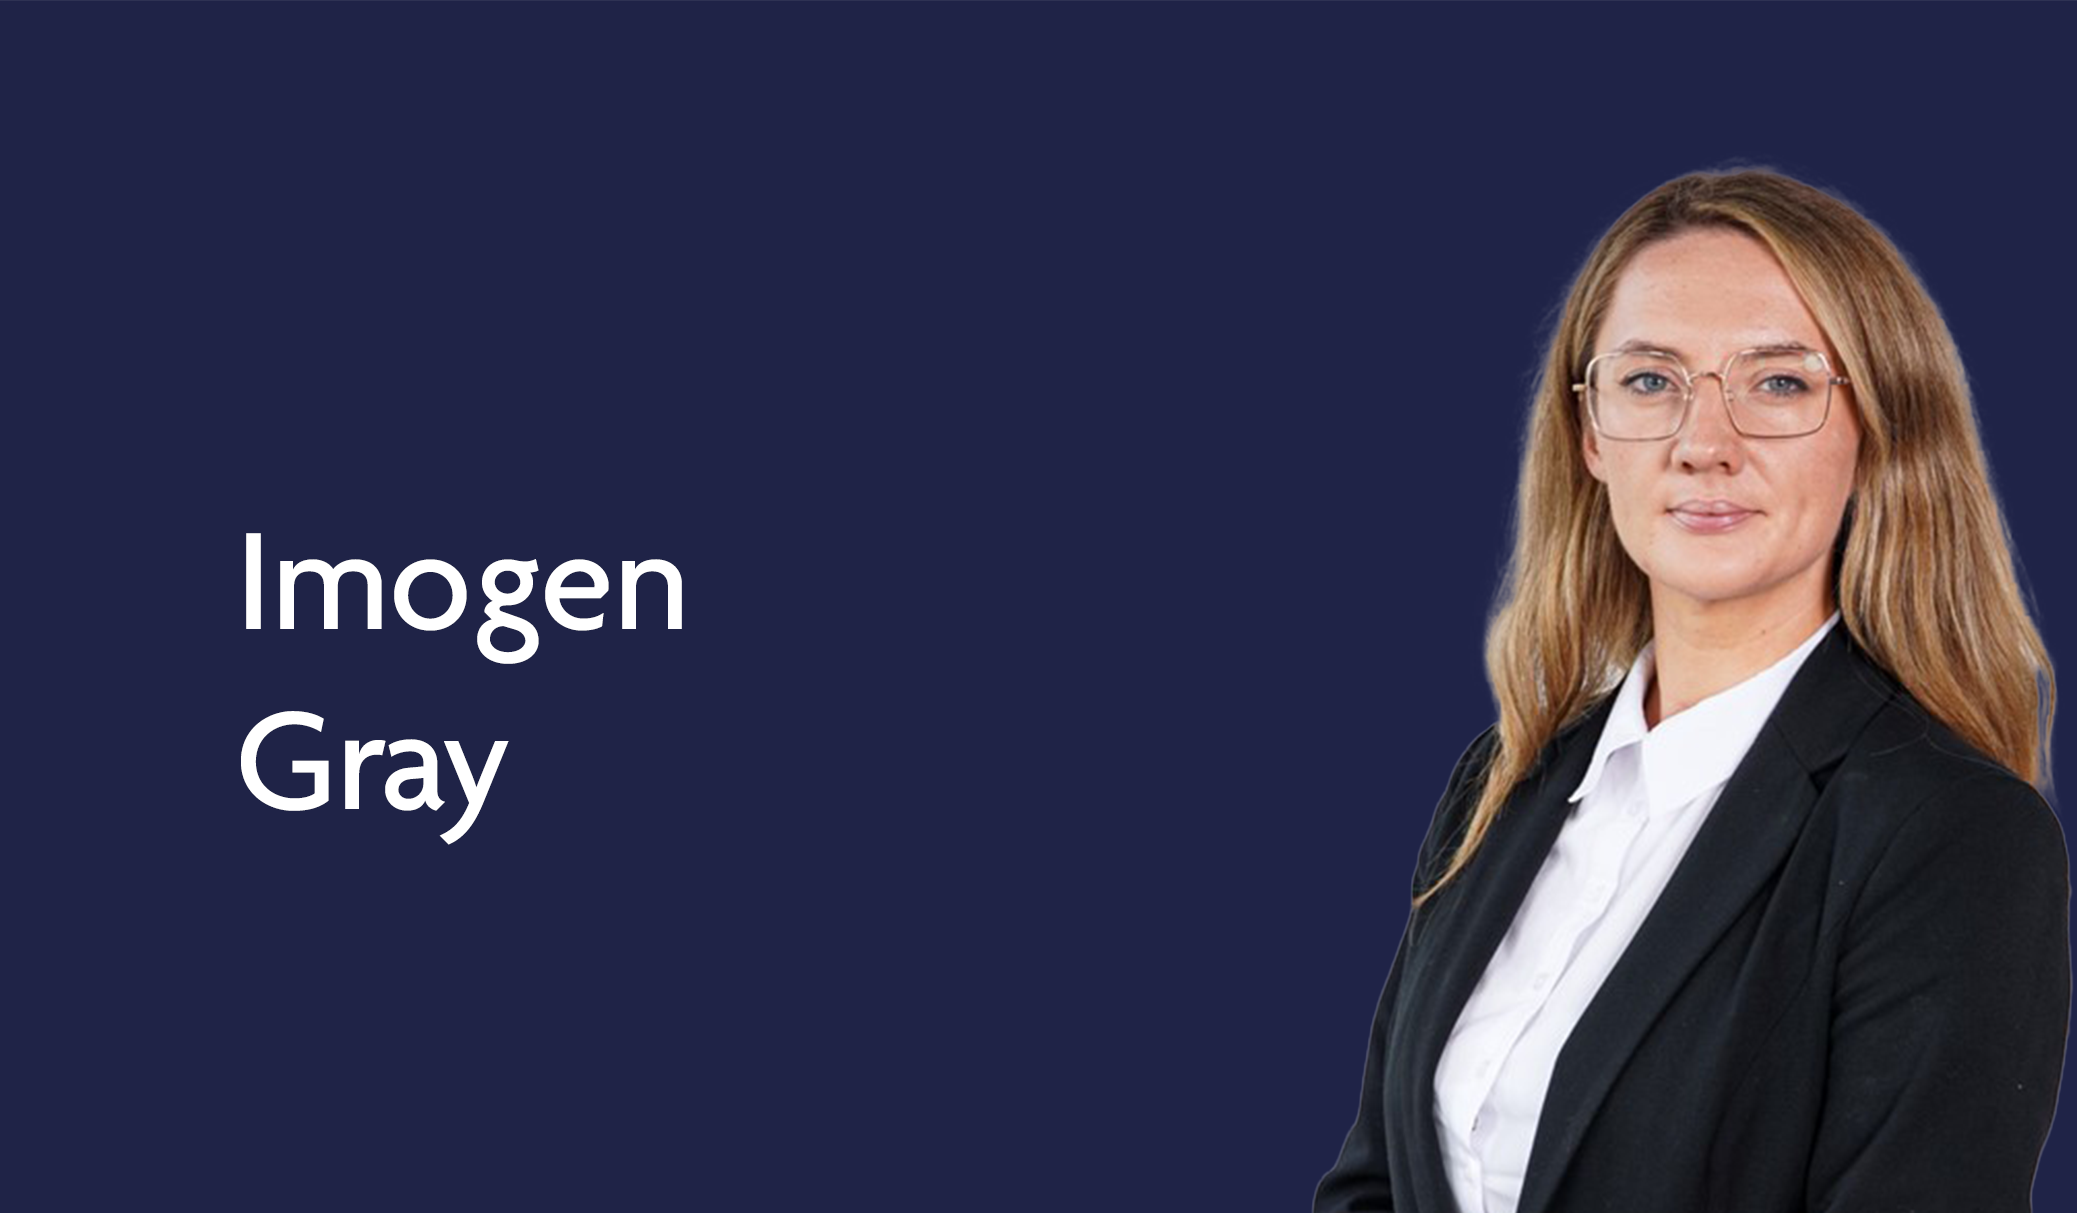 Imogen Gray – My First Month of Chancery and Commercial Pupillage at Parklane Plowden Chambers